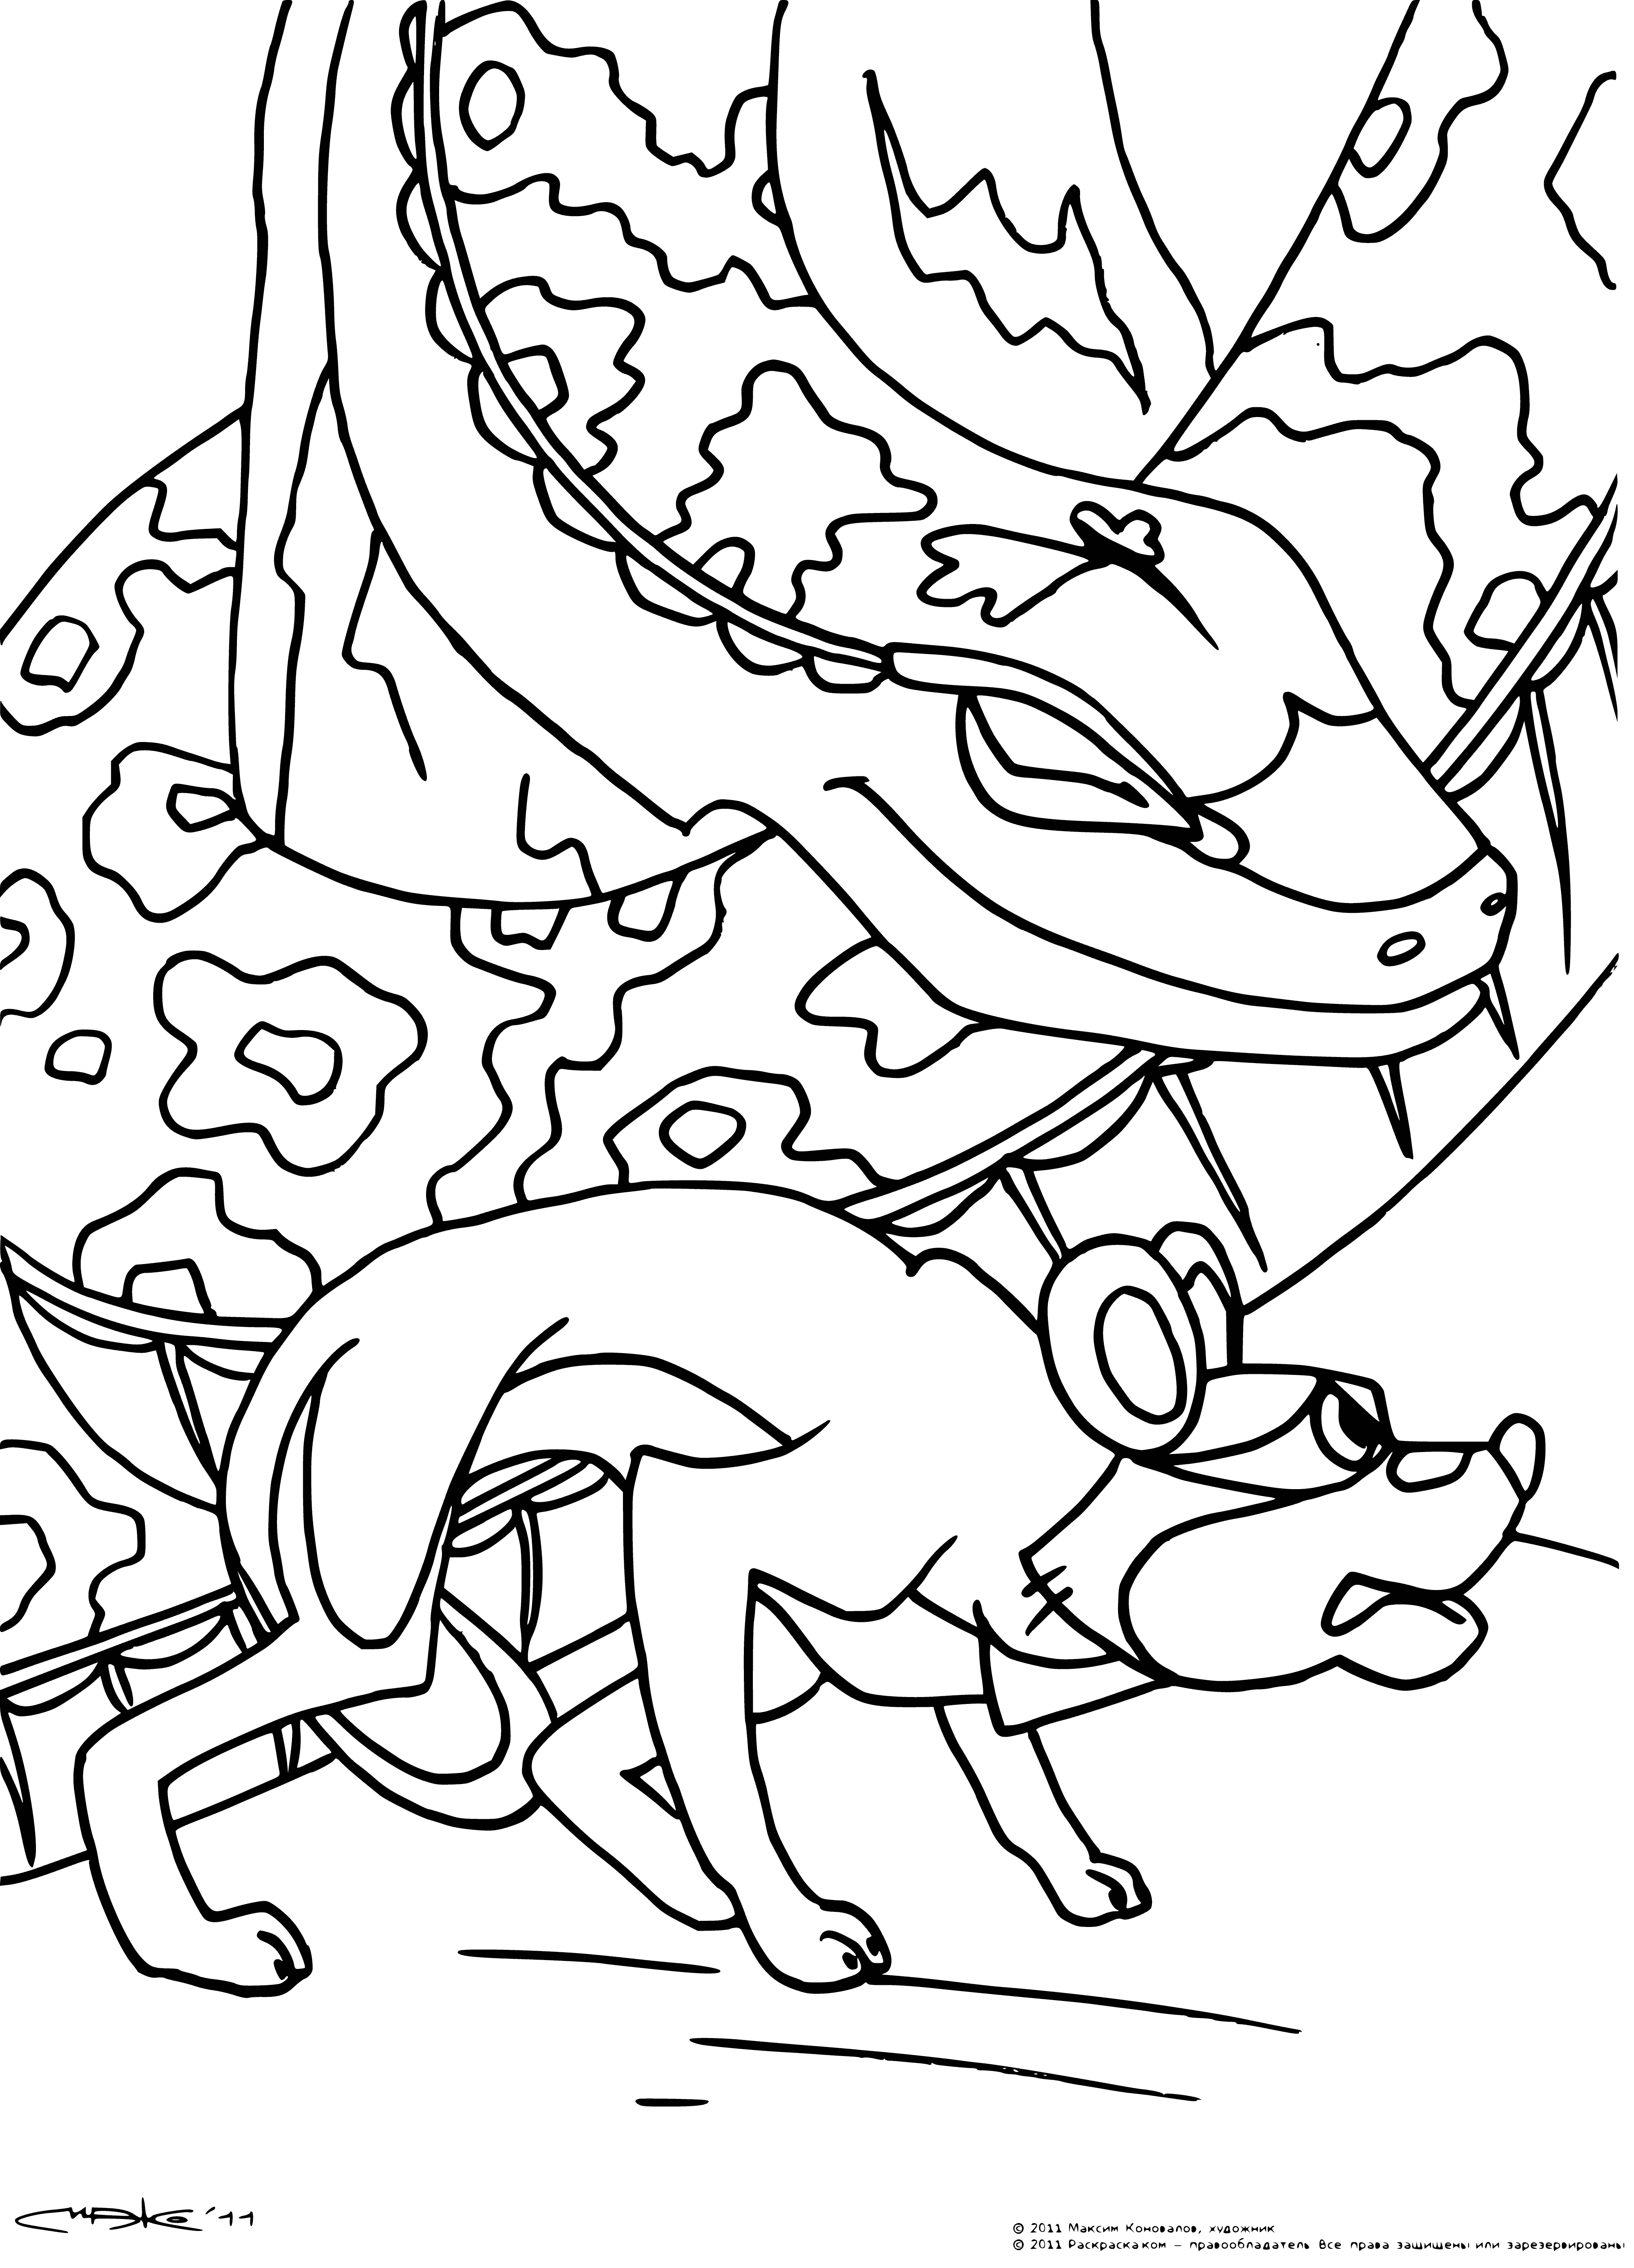 coloring page: Jackal stands on hind legs, smiling, tongue out, looking up at coiled snake, who looks down with apparent wisdom.